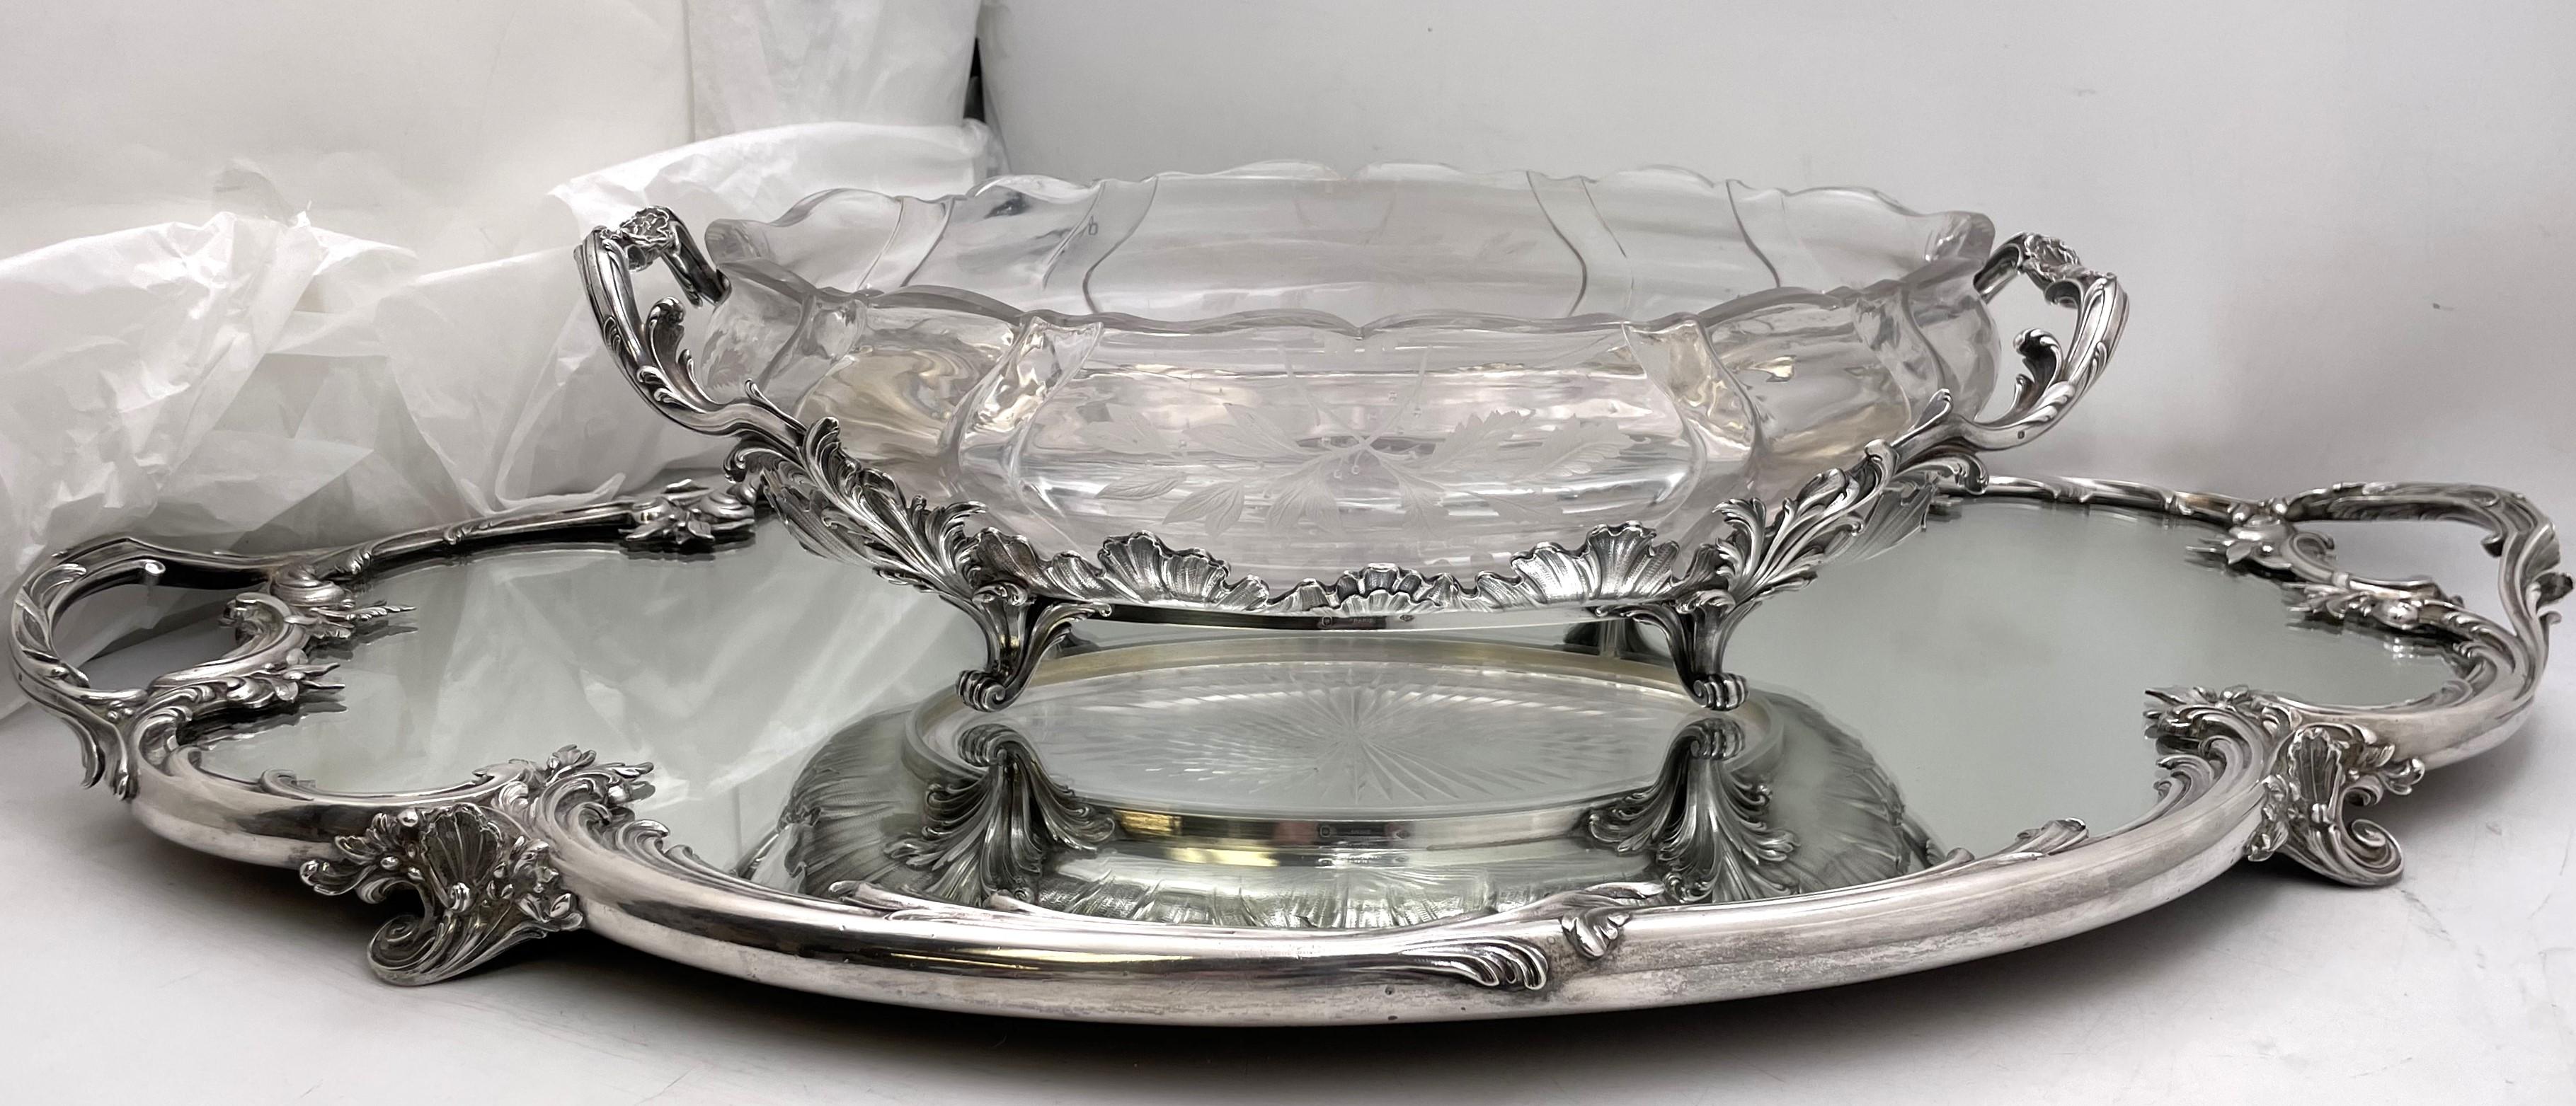 Cardeilhac, French 0.950 (higher purity than sterling) silver ensemble from the early 20th century, all in Rococo style, consisting of:

- a two-handled mirrored plateau or tray, richly decorated with beautifully chased acanthus fronds and scrolls